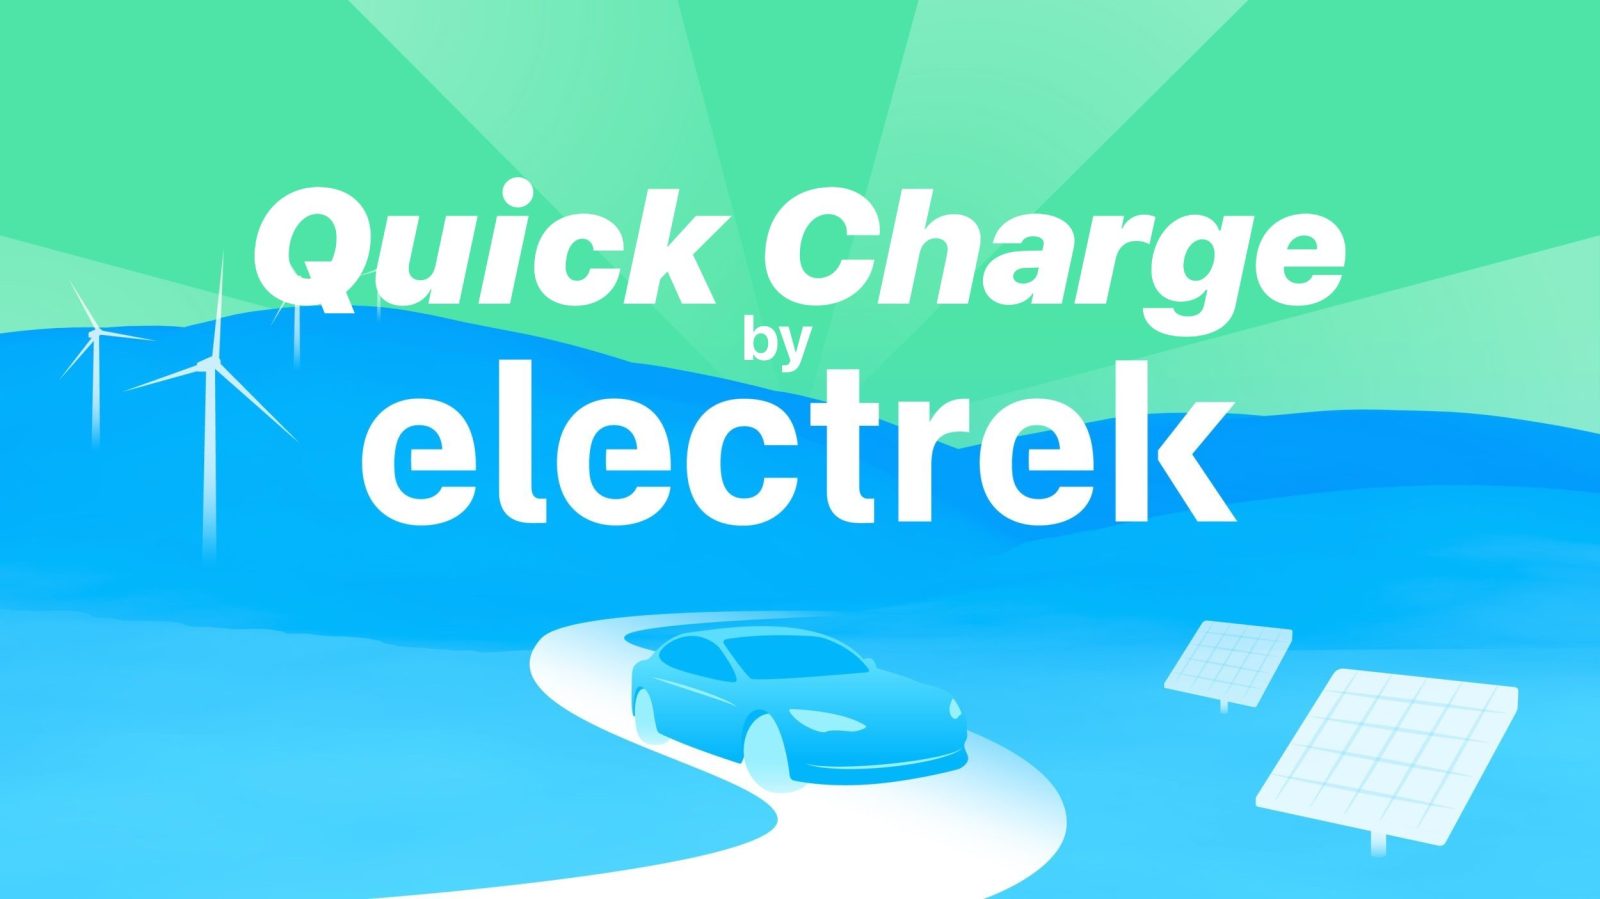 quick-charge-placeholder-lead-1.jpg?quality=82&strip=all&w=1600